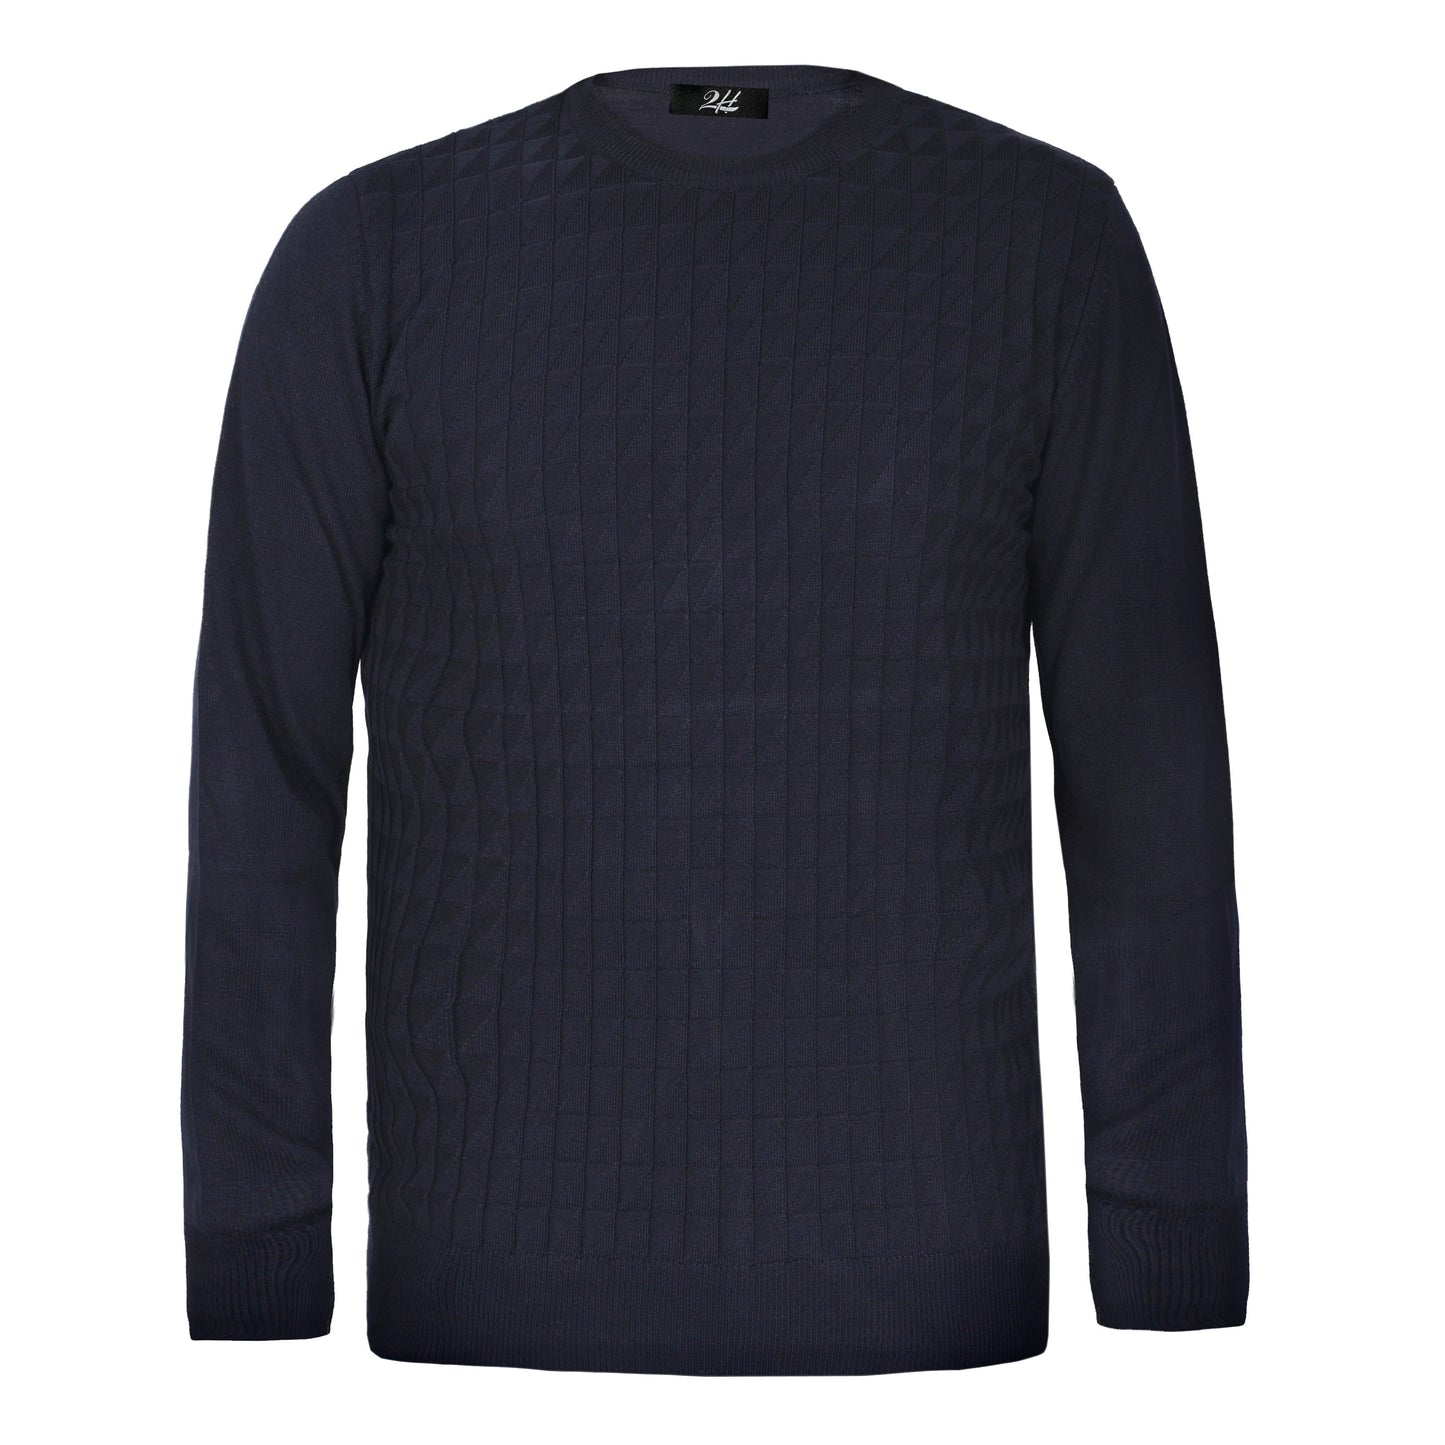 SALE! 2H Navy Small Squareds  Knitted Round Neck Sweater